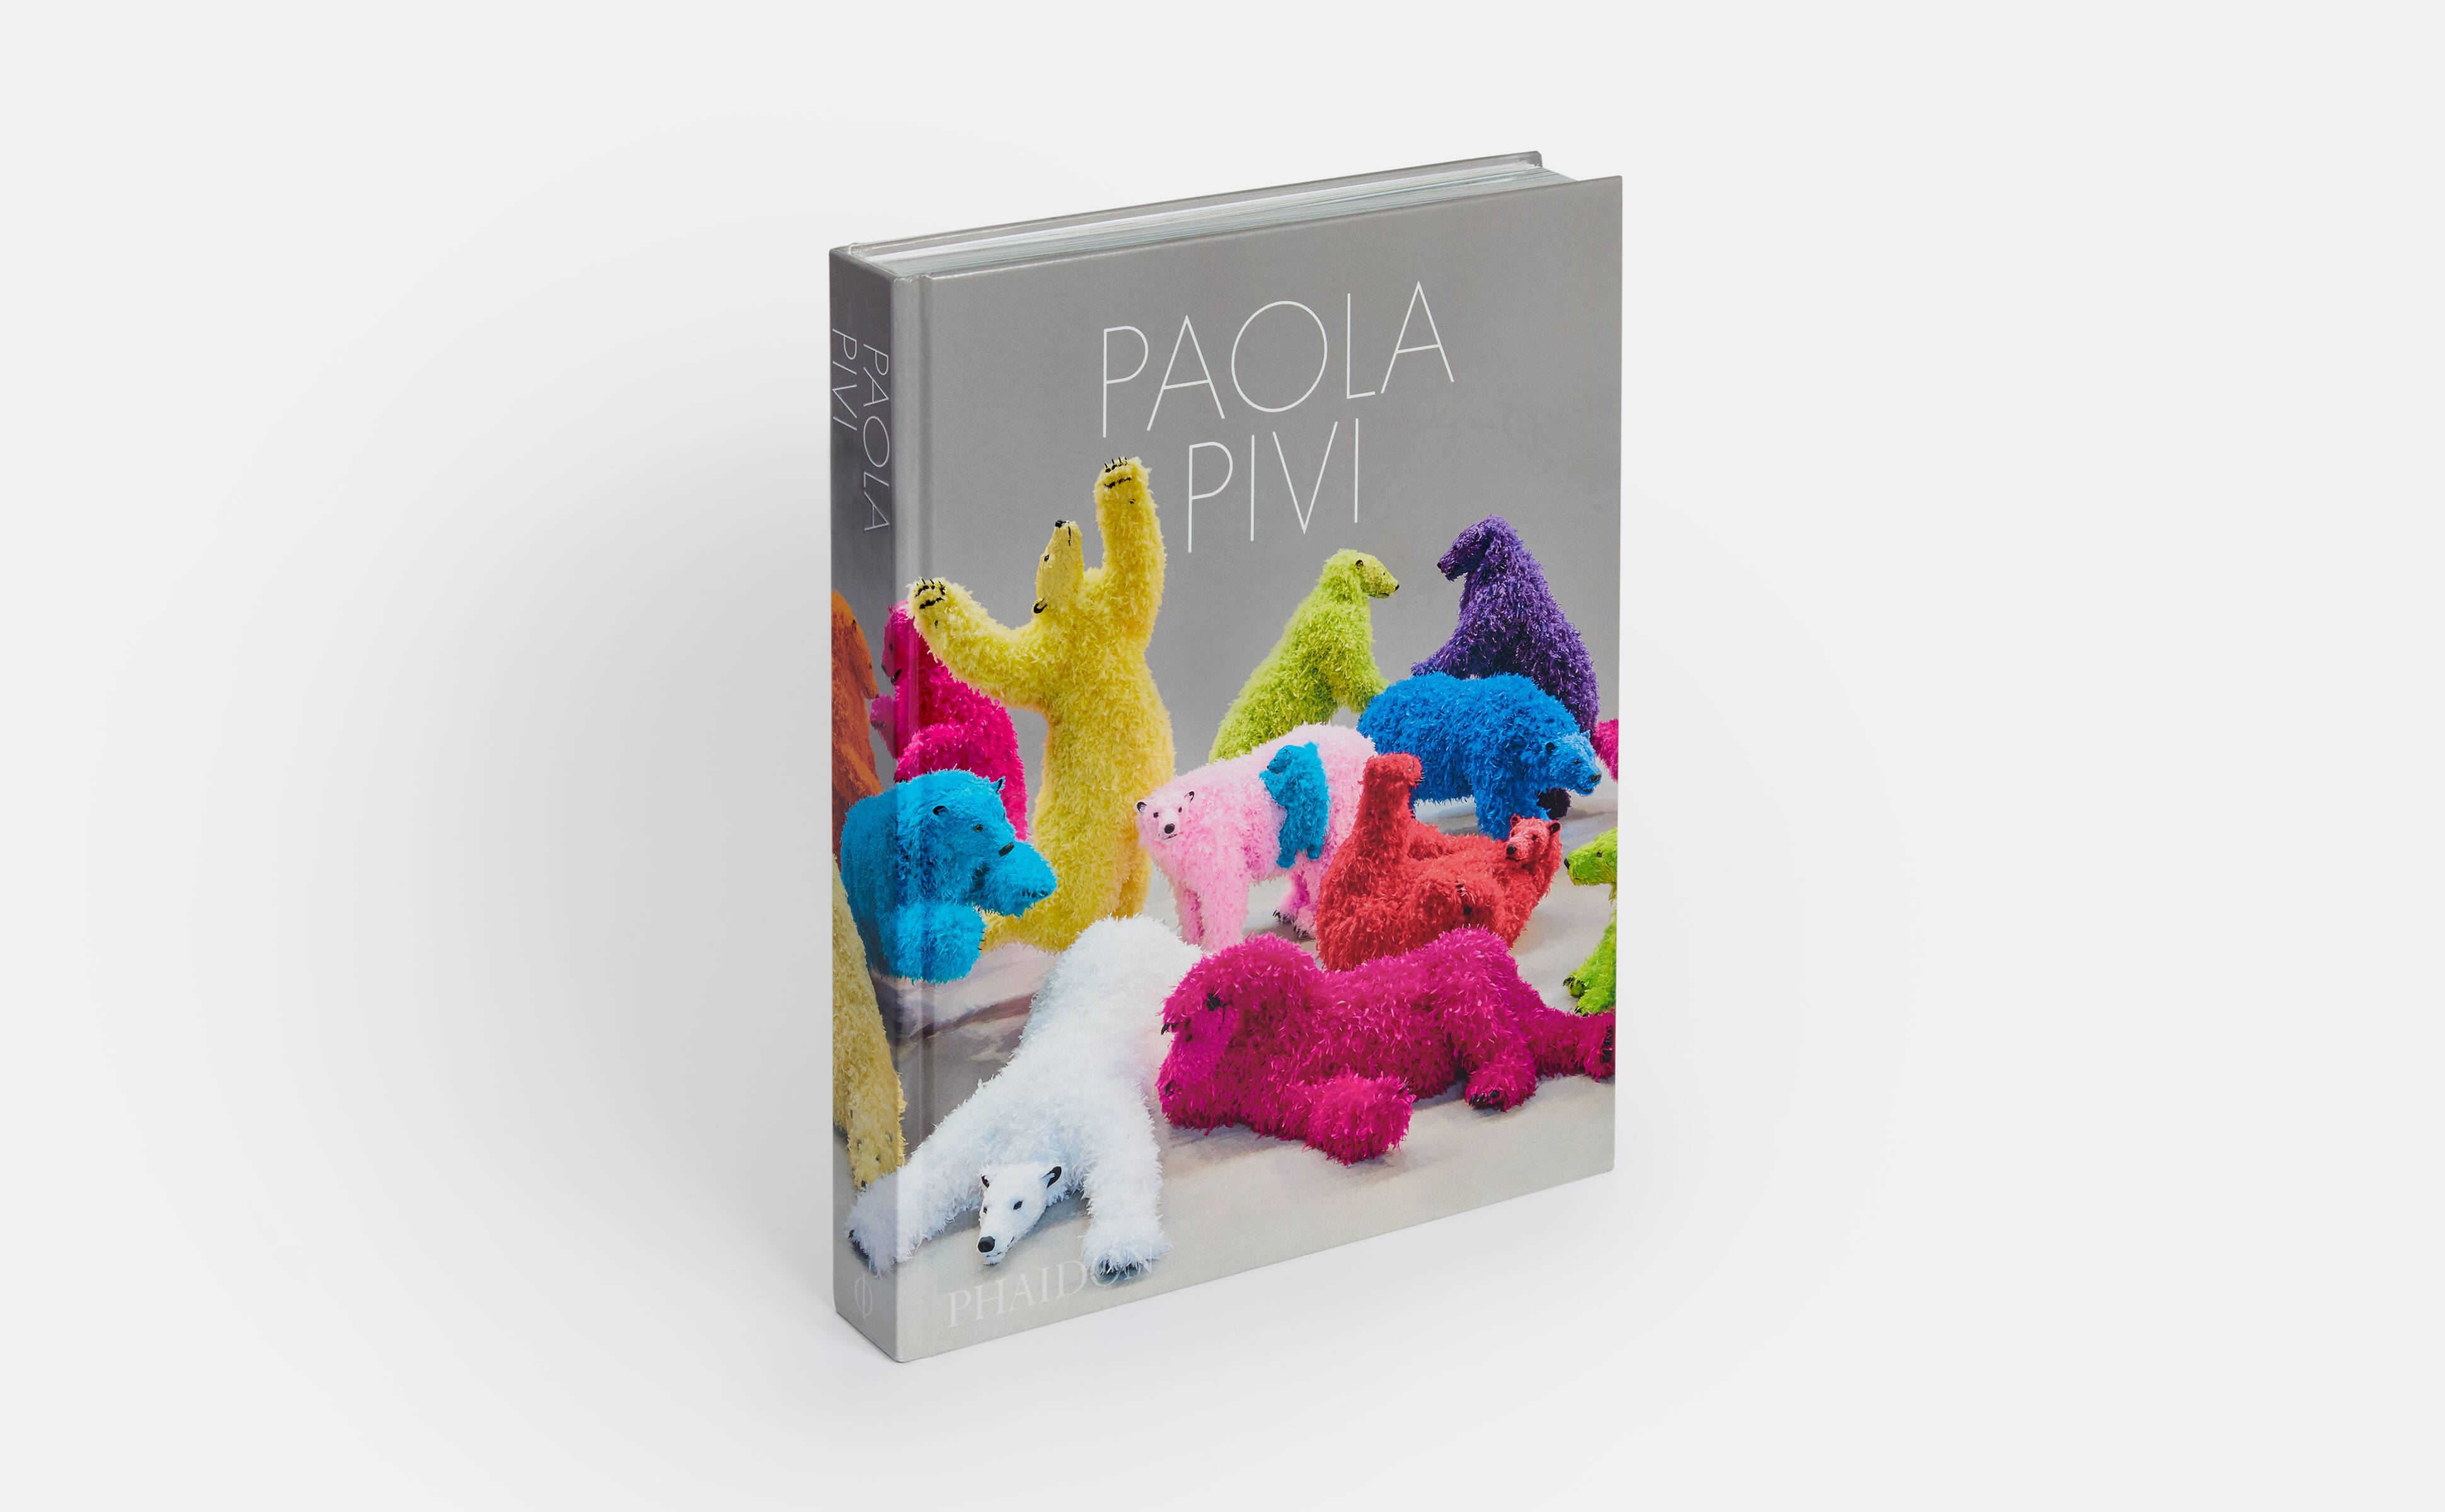 The beauty in Paola Pivi’s other beasts